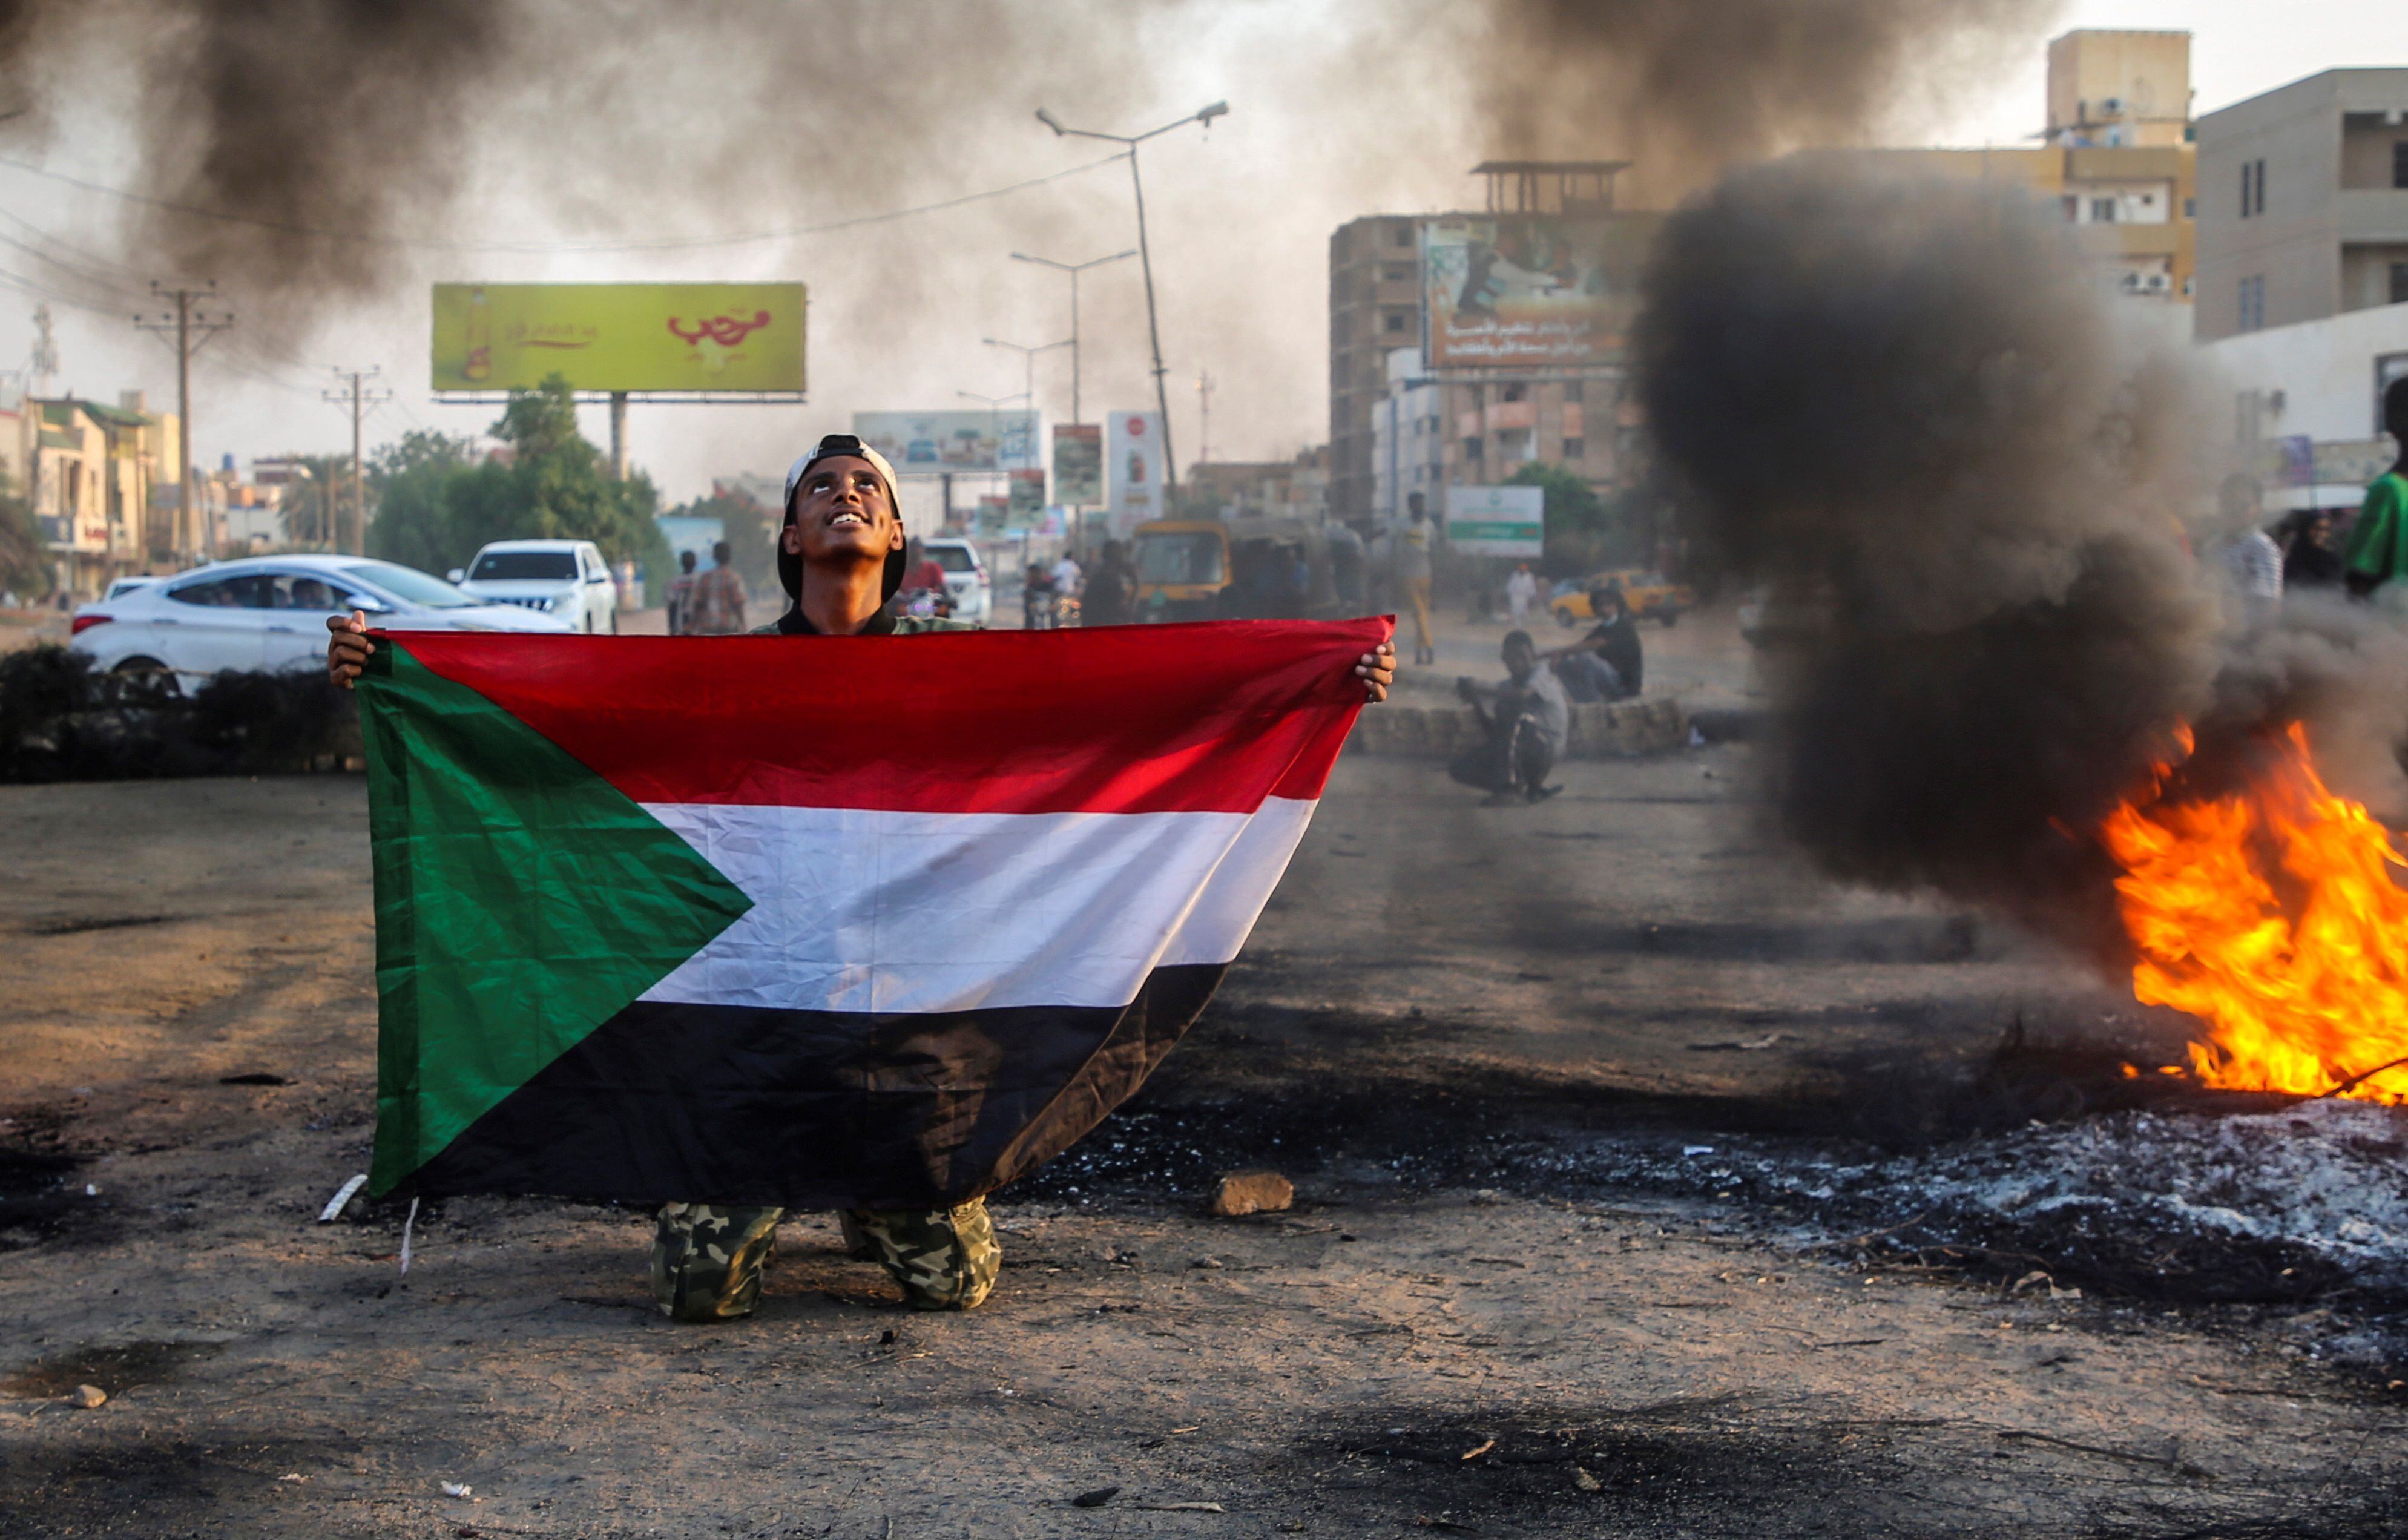 A Sudanese protester holds the national flag next to burning tires during a demonstration in the capital Khartoum, Sudan, on October 26, 2021. EFE / Mohammed Abu Obaid
